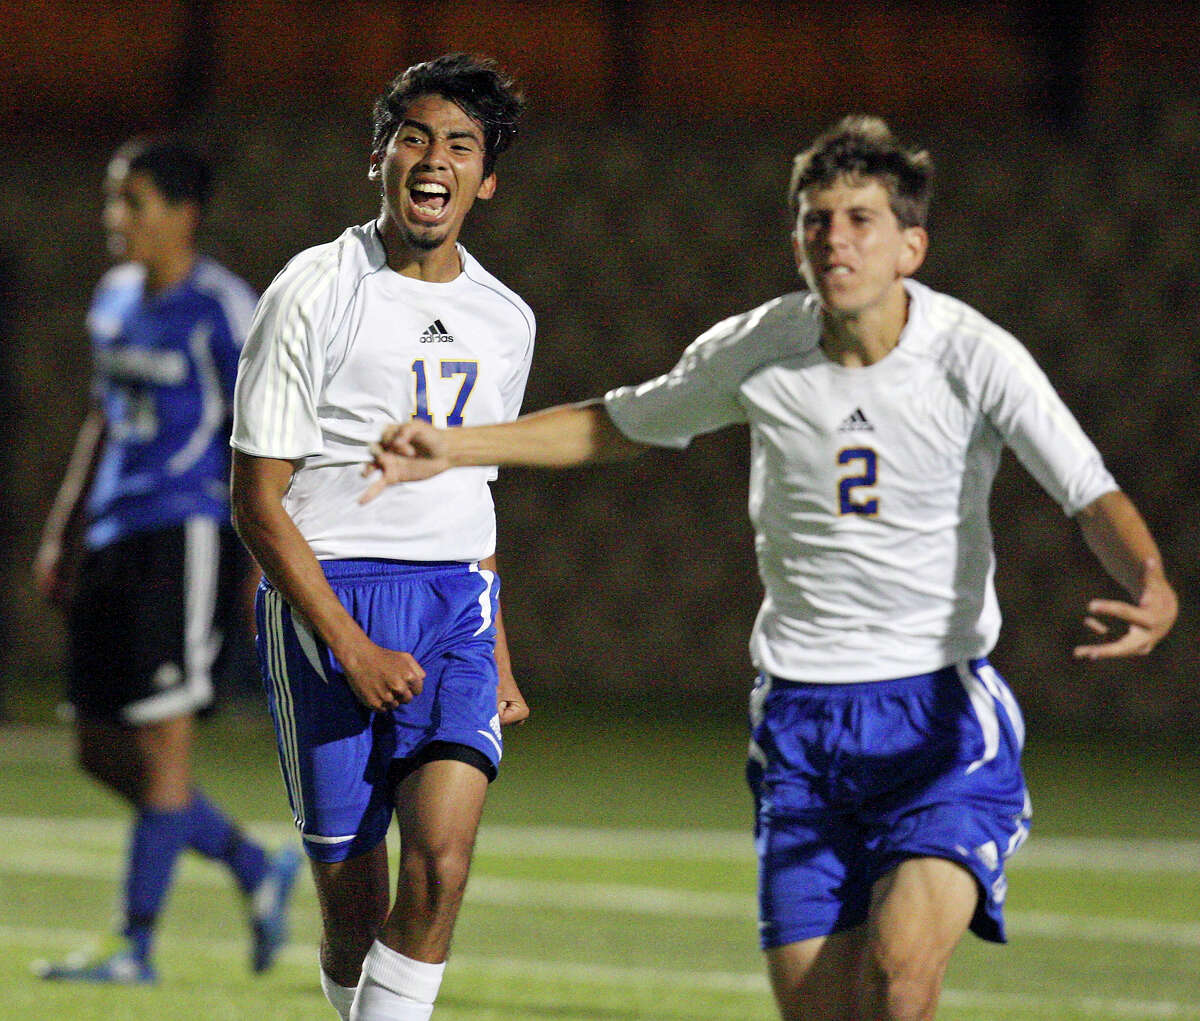 Alamo Heights' Diego Hernandez (left) and teammate Joey Ortega celebrate their 1-0 win over Friendswood in the Class 4A state semifinal game held Friday April 20, 2012 at Birkelbach Field in Georgetown, Tx.